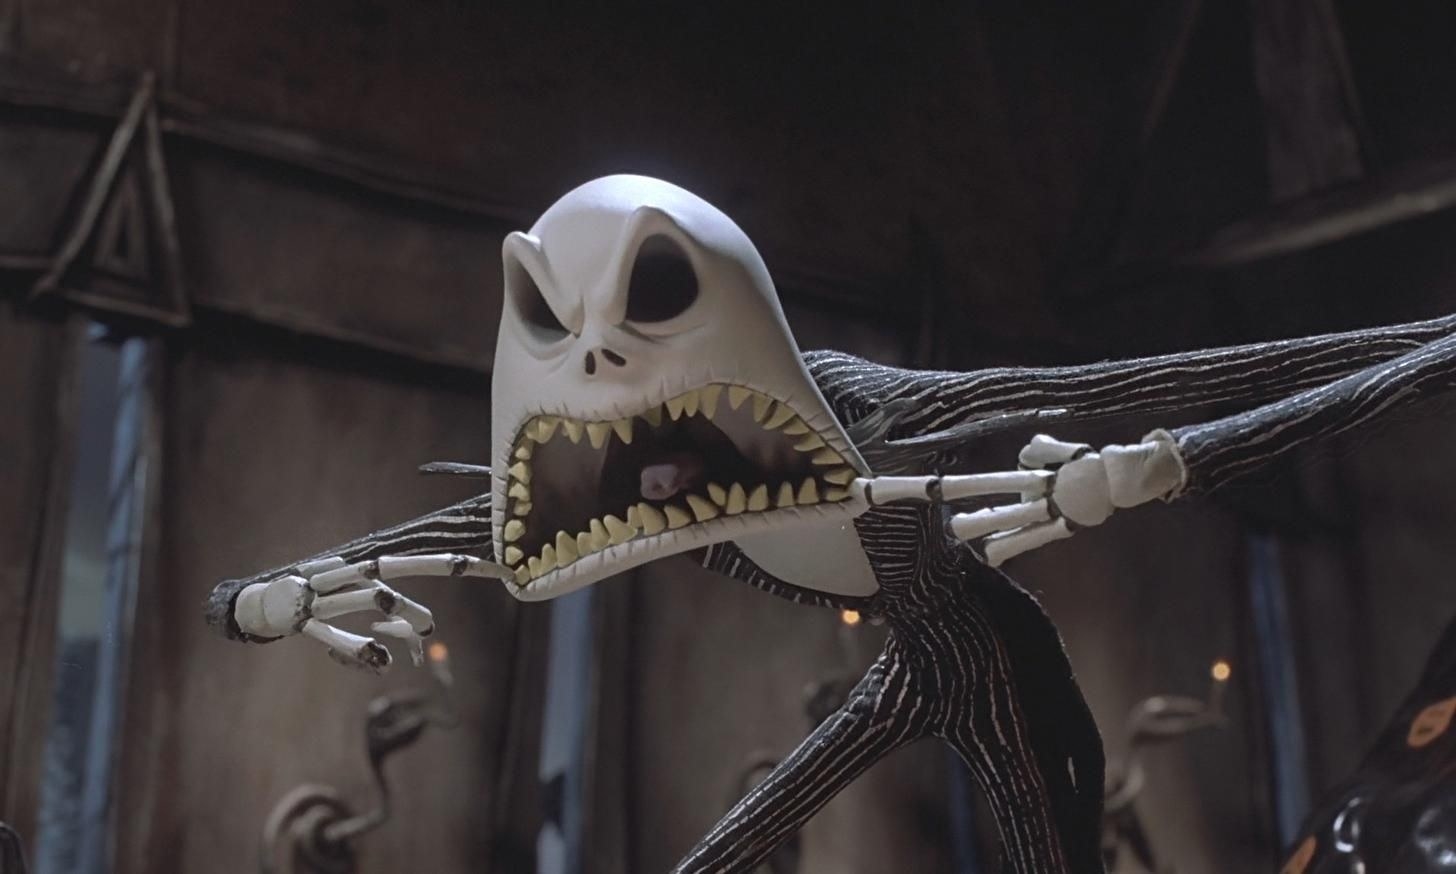 17 The Nightmare Before Christmas facts